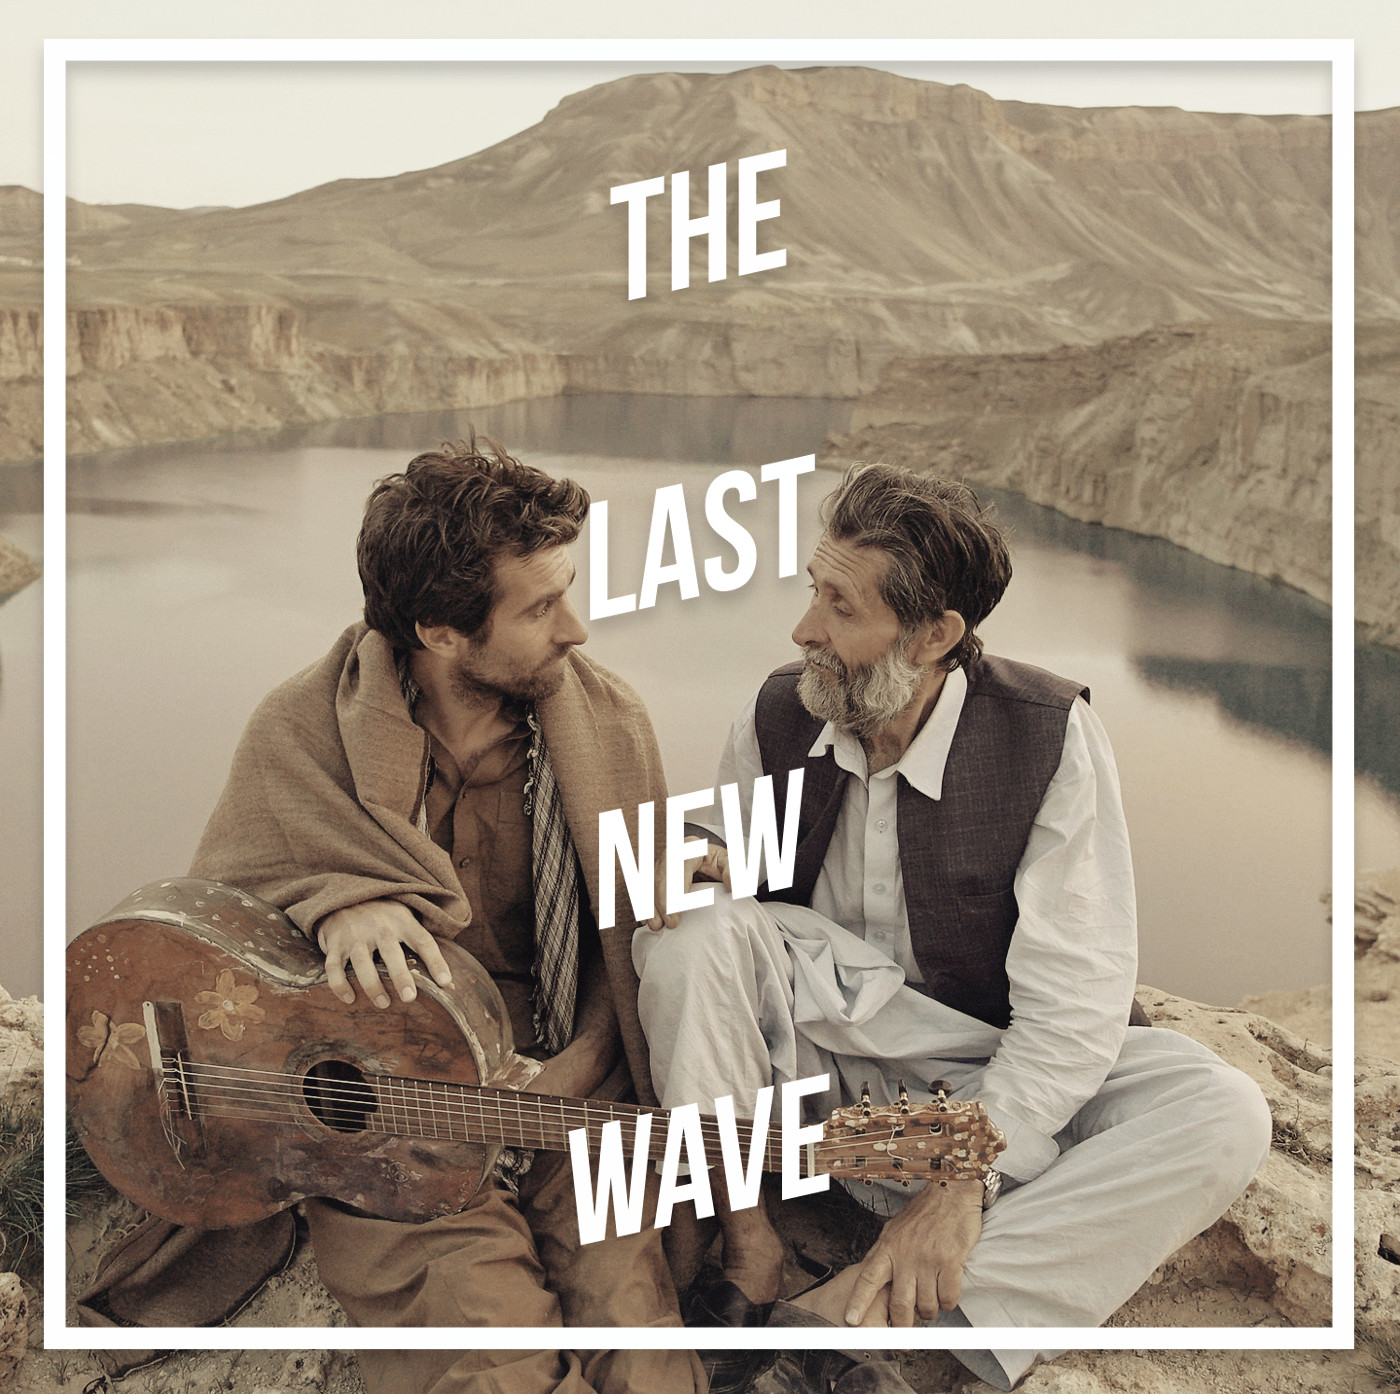 Jirga Director Benjamin Gilmour and Actor Sam Smith Interview - The Last New Wave